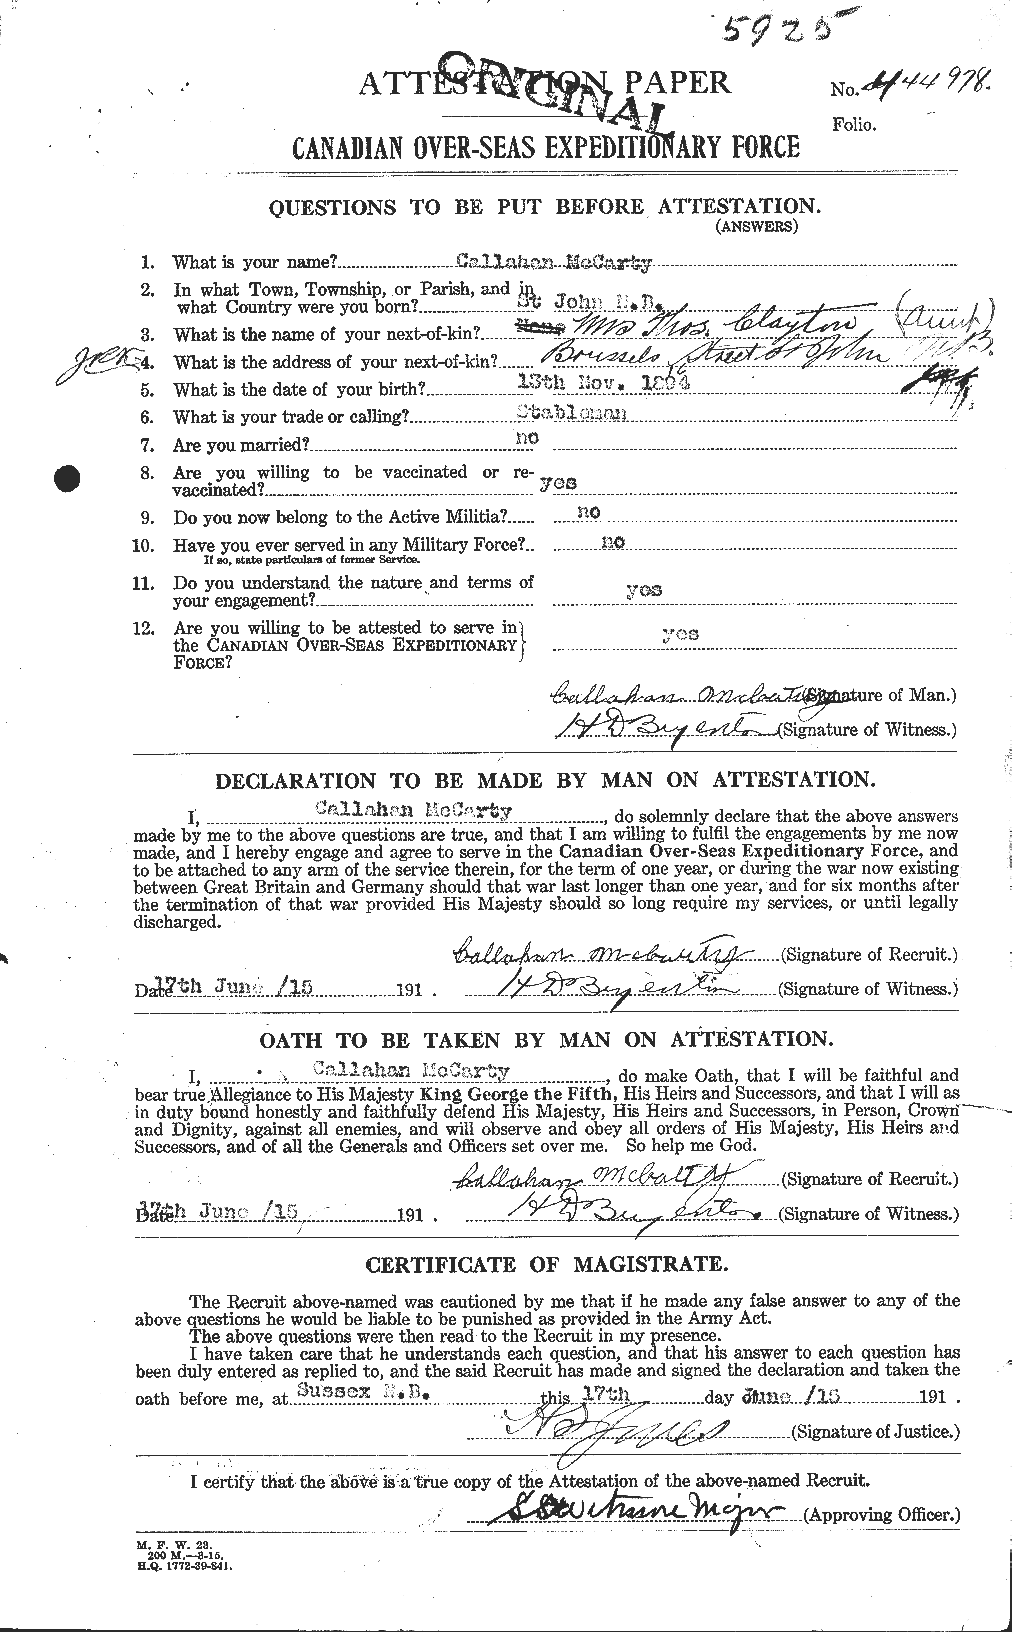 Personnel Records of the First World War - CEF 133517a